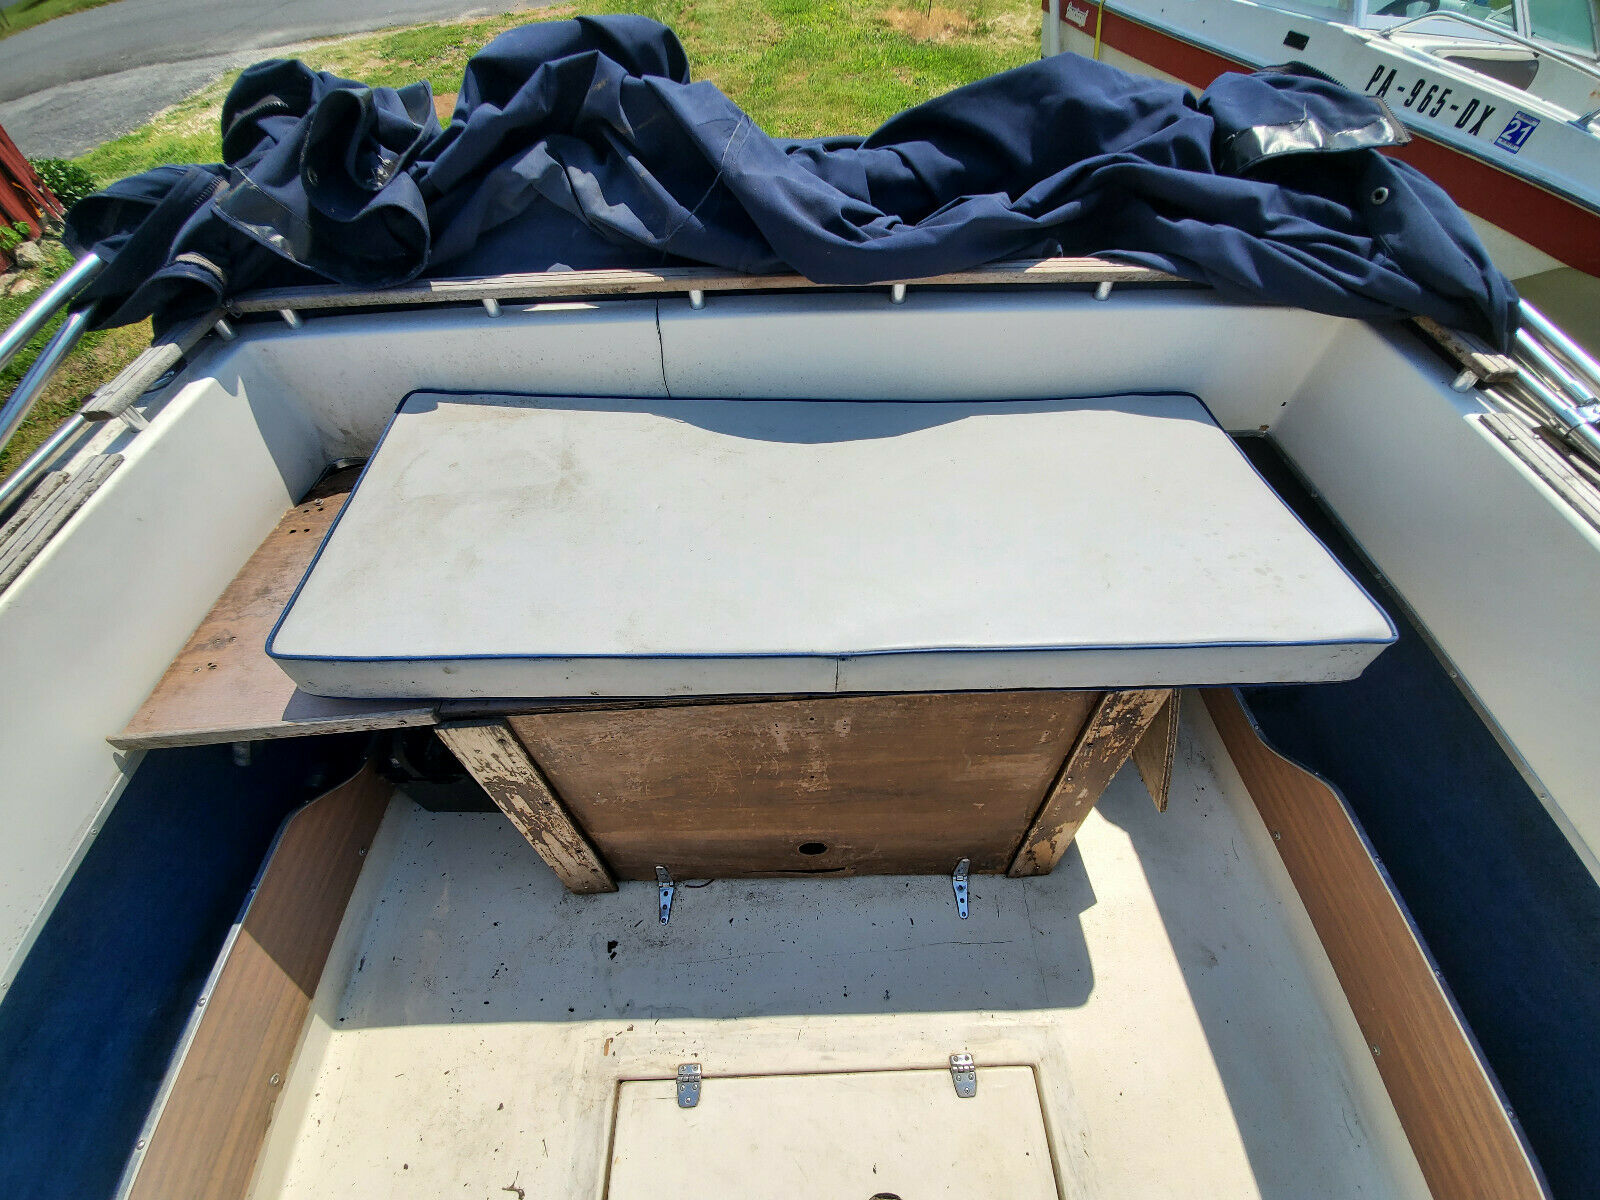 Manatee Manatee 1986 for sale for $100 - Boats-from-USA.com